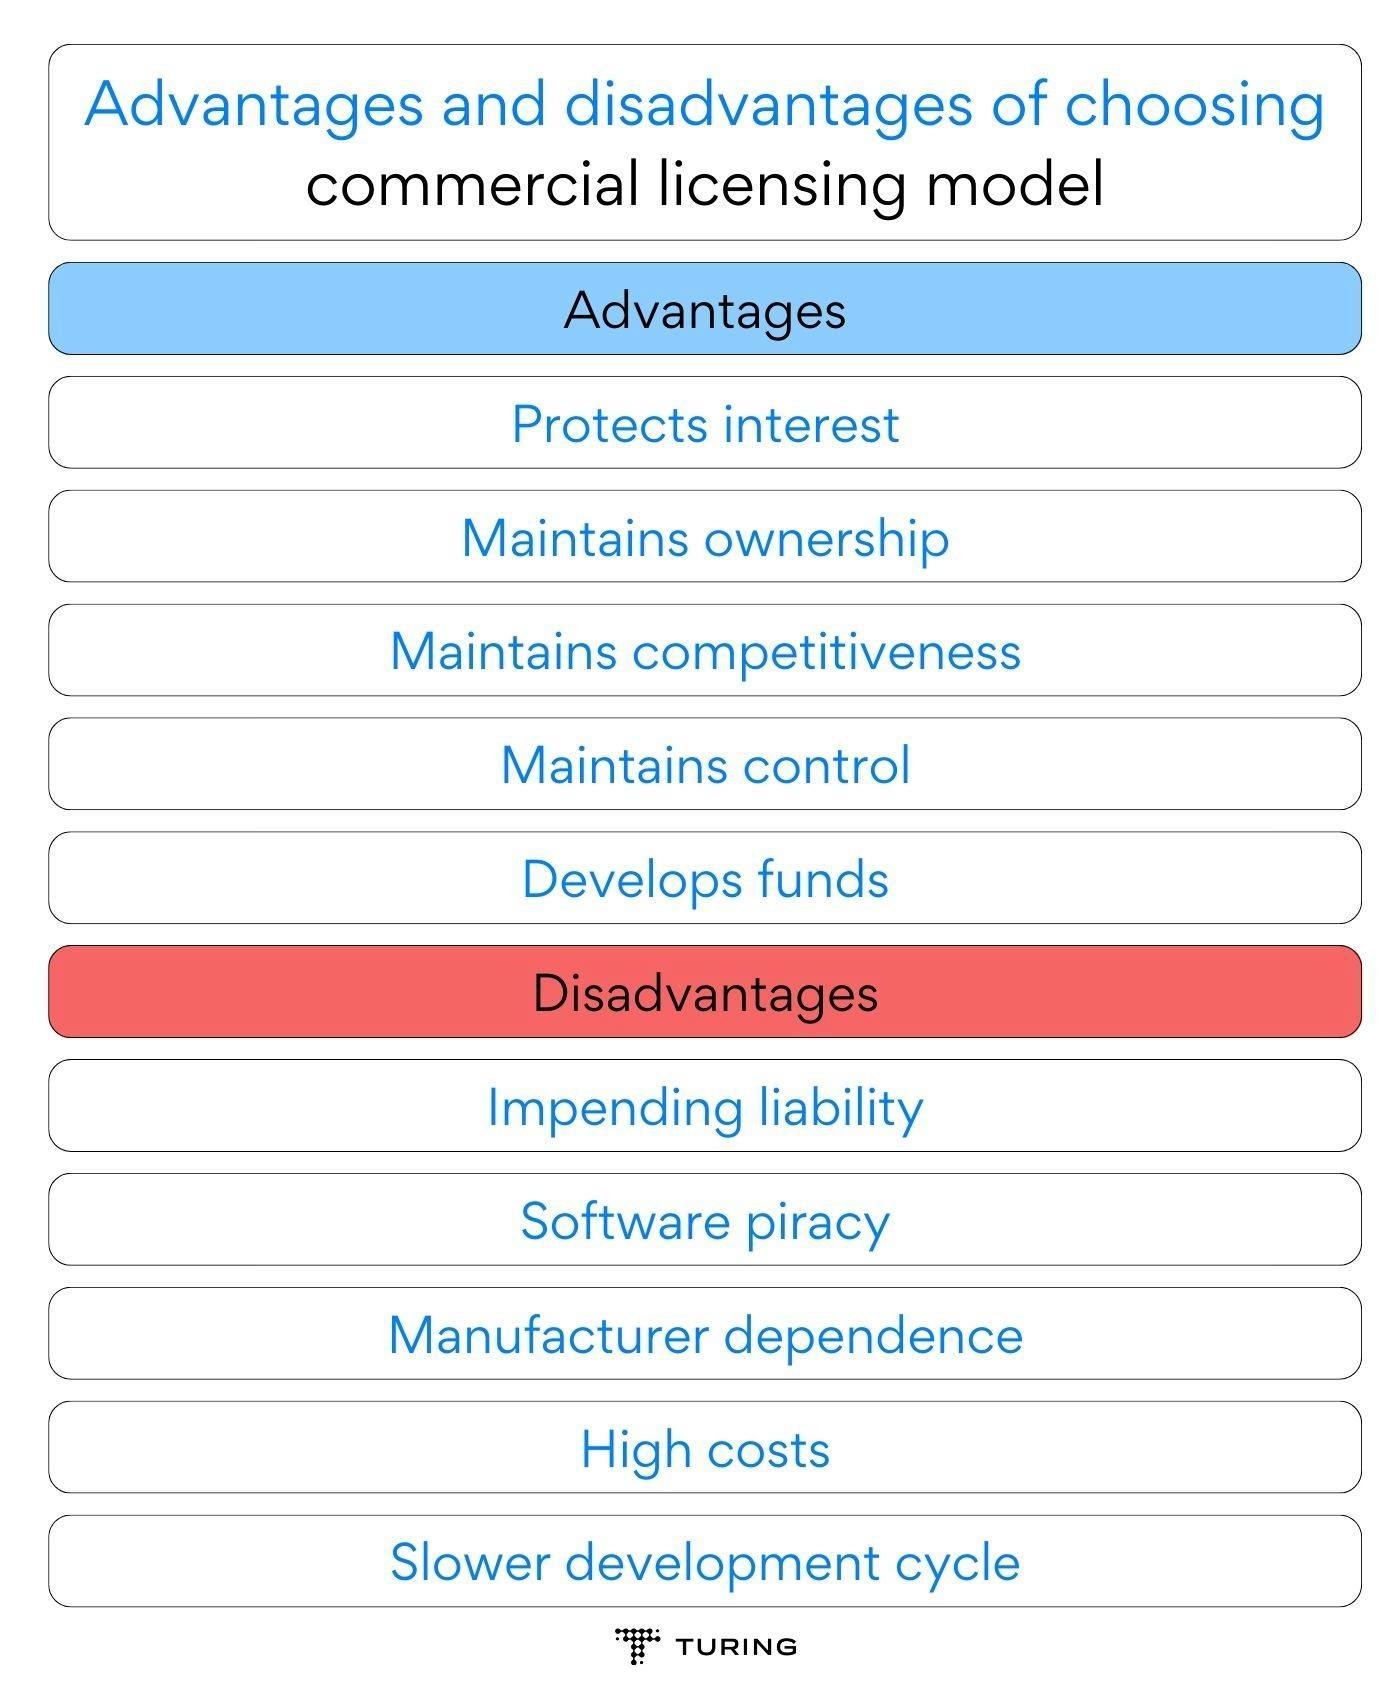 Advantages and disadvantages of choosing commercial licensing model